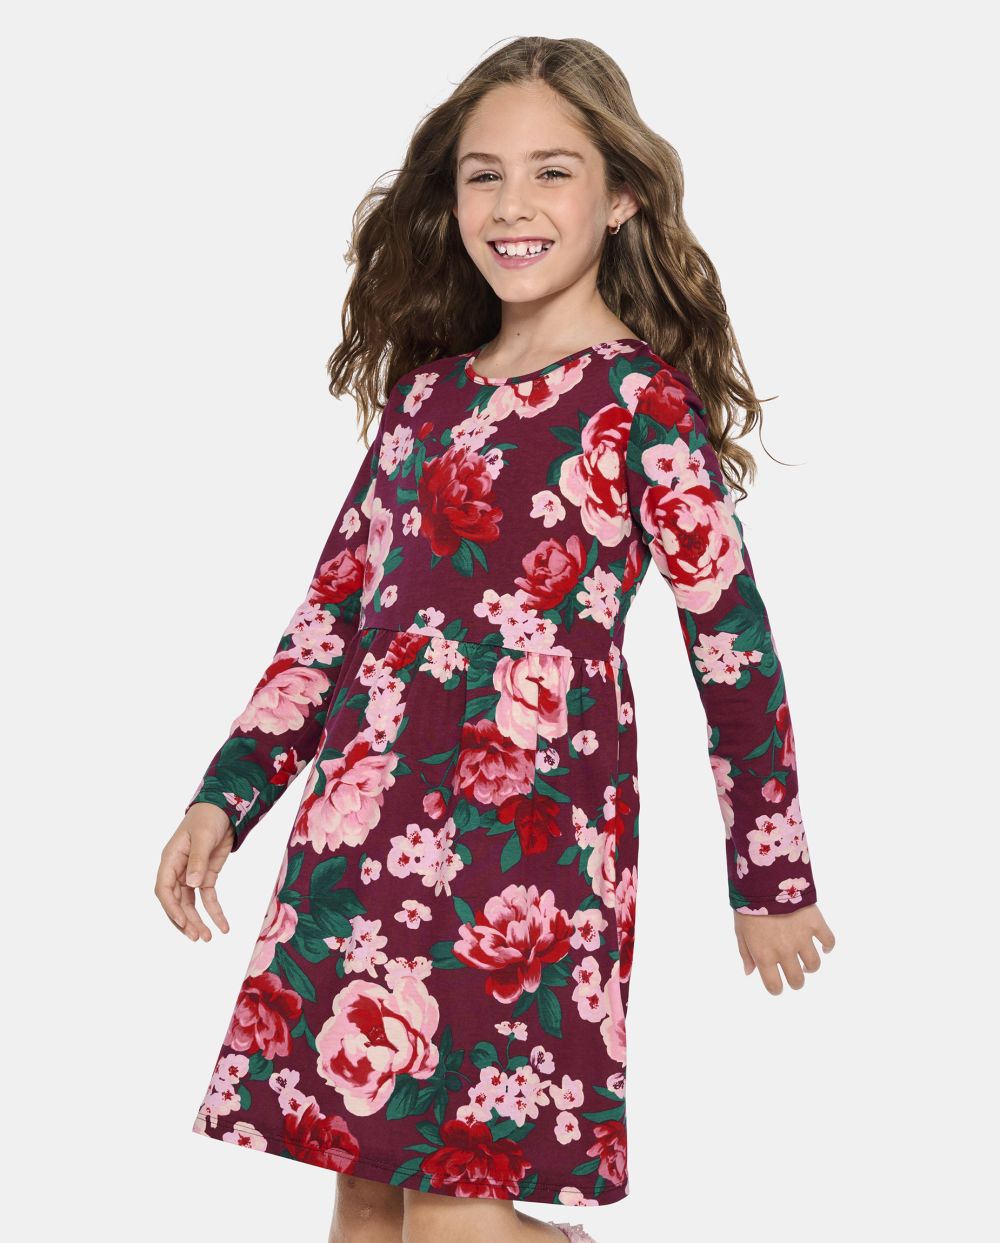 Girls Long Sleeves Crew Neck Above the Knee Floral Print Dress